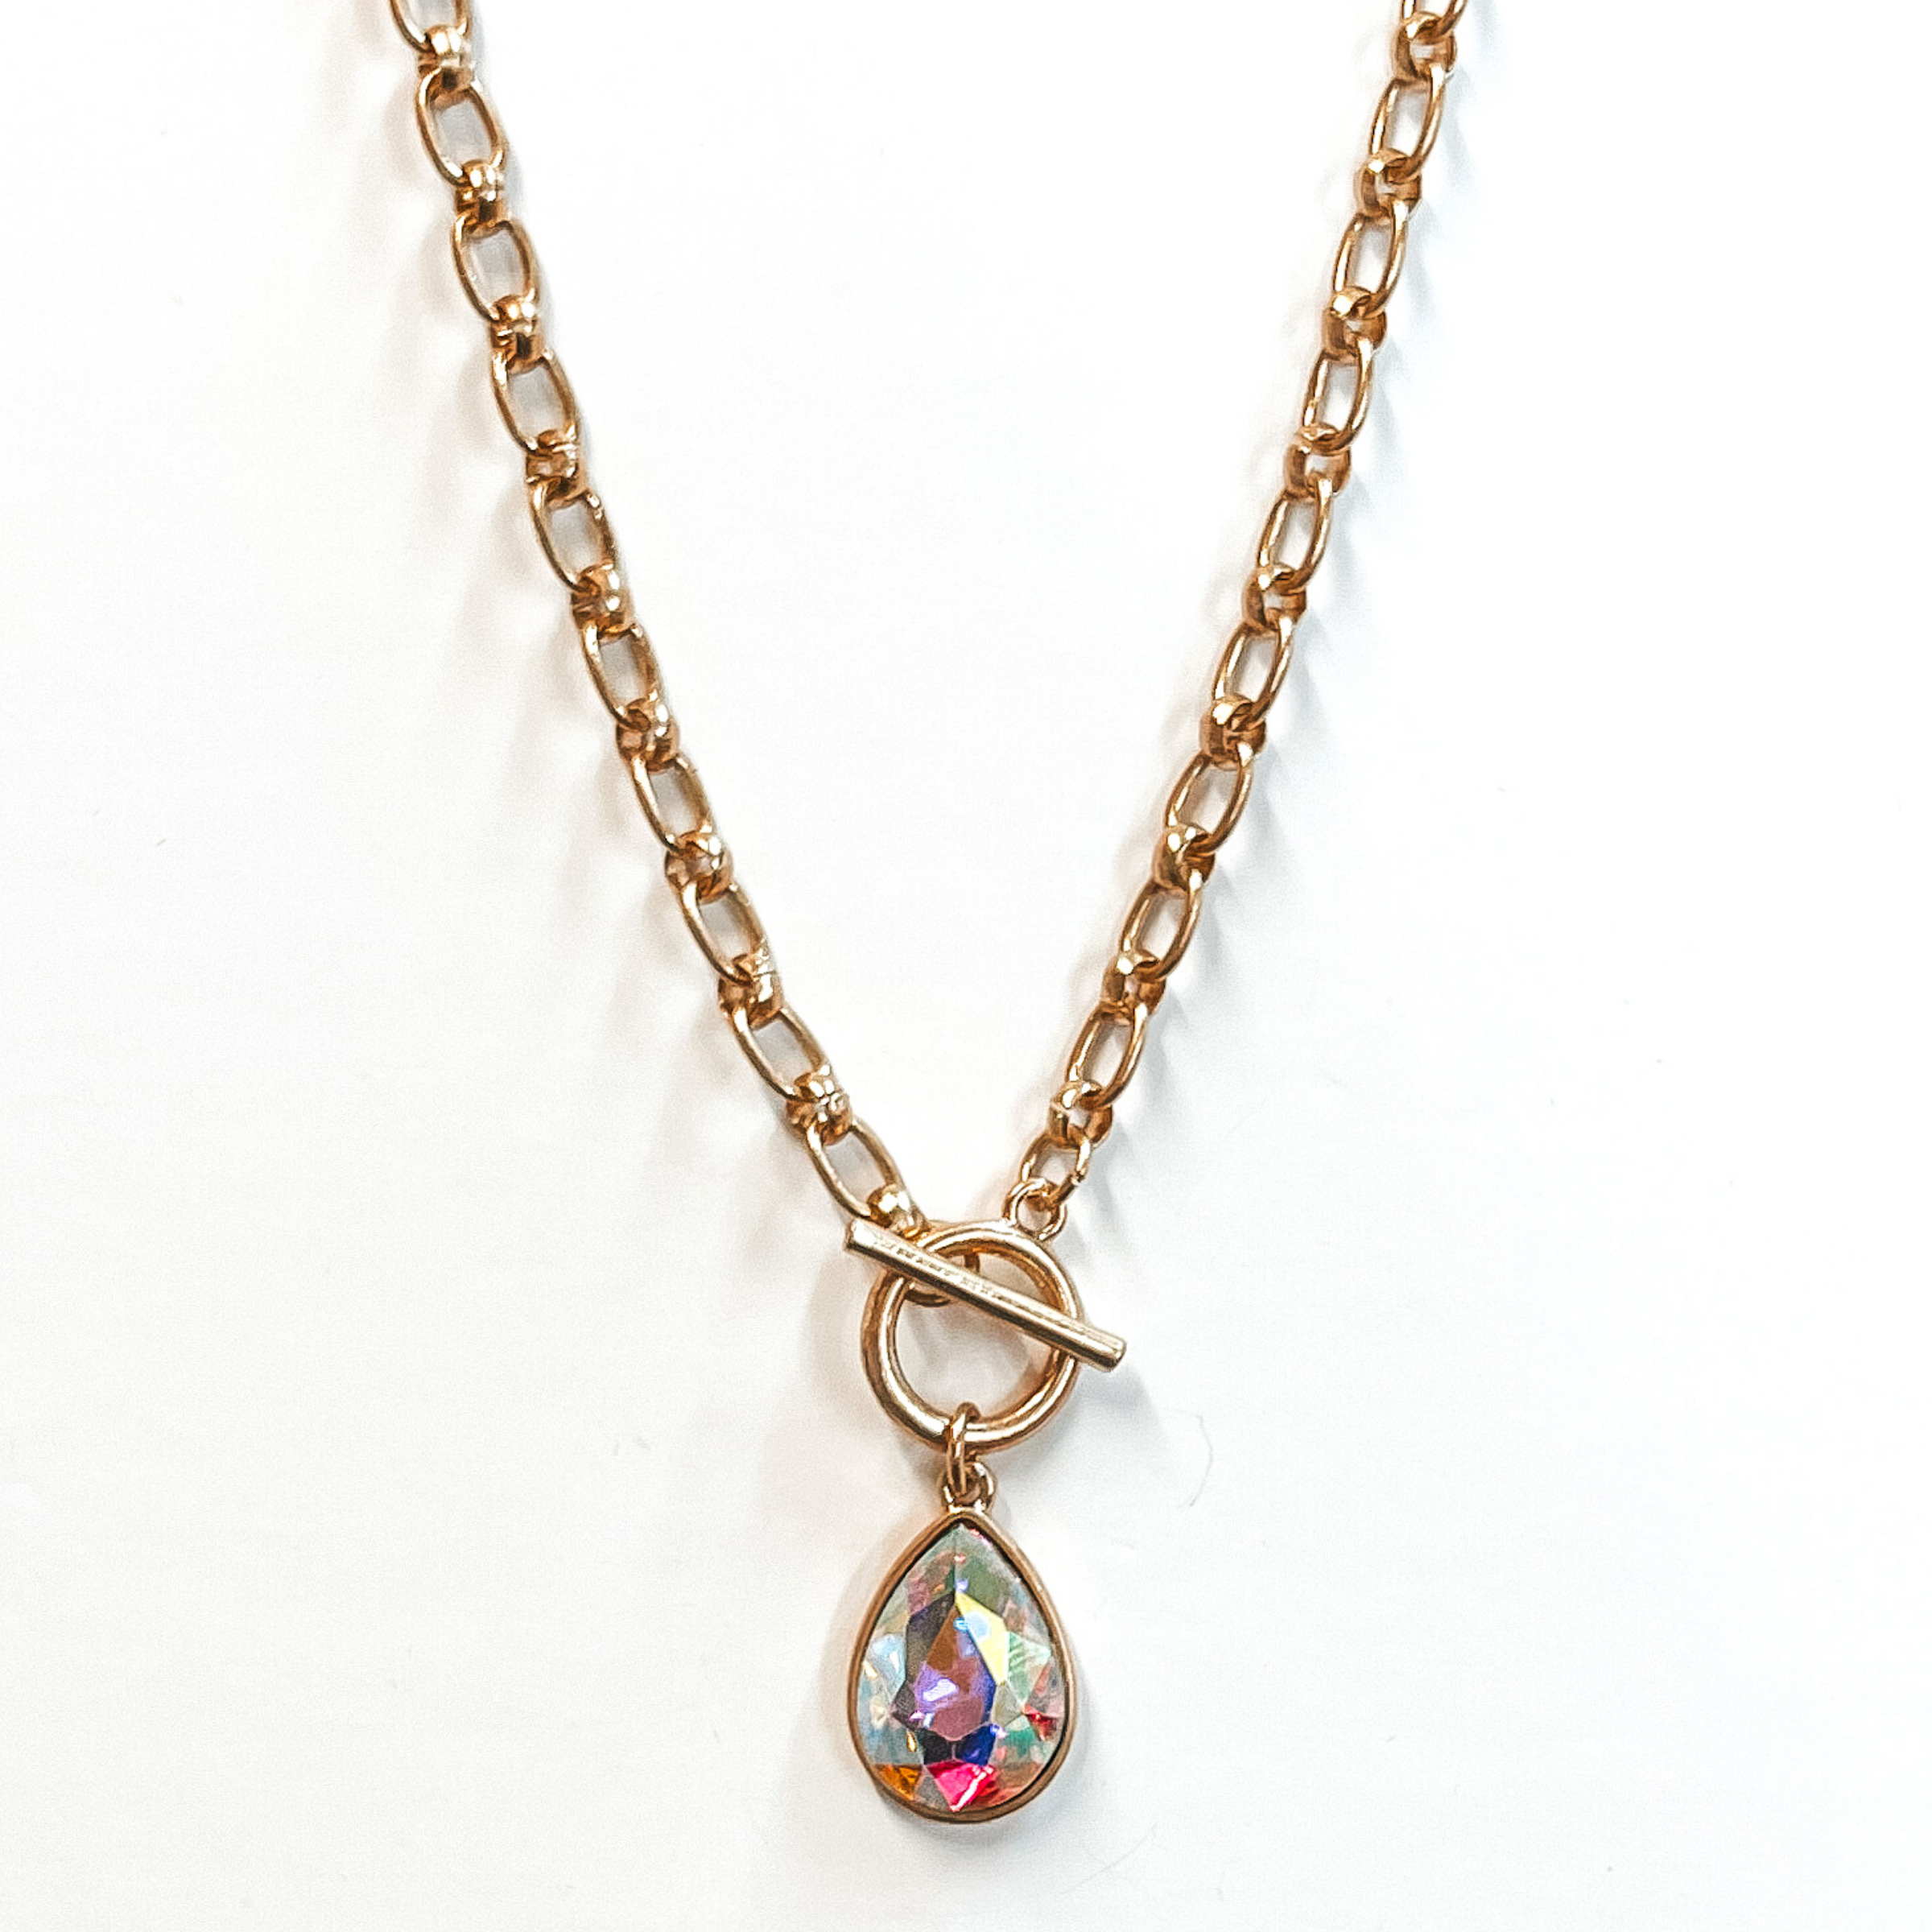 Gold chain necklace with front toggle clasp. This necklace includes an AB teardrop crystal with a gold backing. This necklace is pictured on a white background. 